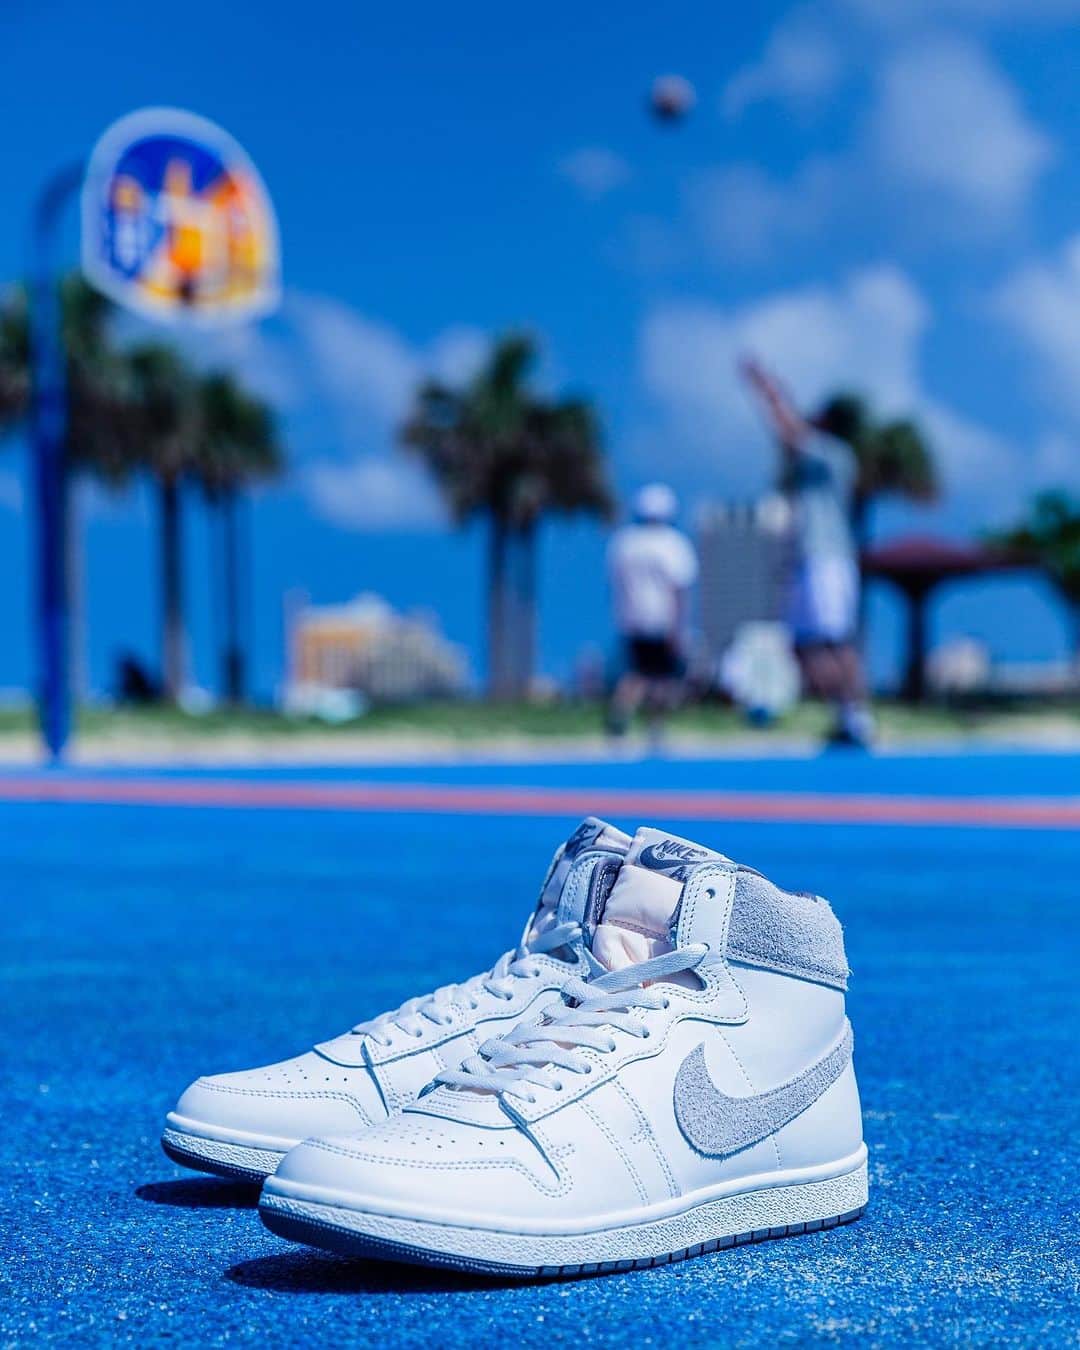 アトモスさんのインスタグラム写真 - (アトモスInstagram)「. NIKE JORDAN AIR SHIP PE SPが9月15日(金)待望のリストック。  言わば、AIR SHIP PE SPはAIR JORDAN 1の原型だ。 足首の保護や捻挫防止の観点からハイカットを採用したシンプルで細身のシルエットで、つま先にかけてのホールド力をより高めるため、トゥに近い3つのアイレットに補強パーツを配置しているのが特徴。 アッパーの大部分がレザーだがスウッシュやアイレットはスエードで、ヒールにクラシックな“NIKE AIR”の文字があしらわれている。  沖縄で8月に開催したTOKYO 23のPOP UPでは”AIR SHIP”のゲリラ販売を行なった。 今回は9月11日(月)よりatmos オンラインにて抽選販売受付開始、9月15日(金)に発売。 ※オンライン抽選のみとなります。  NIKE JORDAN AIRSHIP PE SP is the long-awaited list on September 15th (Friday.  In other words, AIR SHIP PE SP is the prototype of AIR JORDAN 1. It is a simple and thin silhouette with high cuts from the perspective of ankle protection and sprain prevention, and features reinforcing parts arranged in three eyelets close to the toe to increase holding power. The upper part is mostly leather, but the swish and eyelets are suede, and the heels are decorated with classical "NIKE AIR."  At TOKYO 23's POP UP held in Okinawa in August, they sold "AIRSHIP" guerrillas. This time, lottery sales will start on September 11th (Mon) through atmos online and will be released on September 15th (Fri). Only online lottery is available.  #tokyo23 #tokyo23basketball #nike #airship #michaeljordan」9月11日 20時02分 - atmos_japan